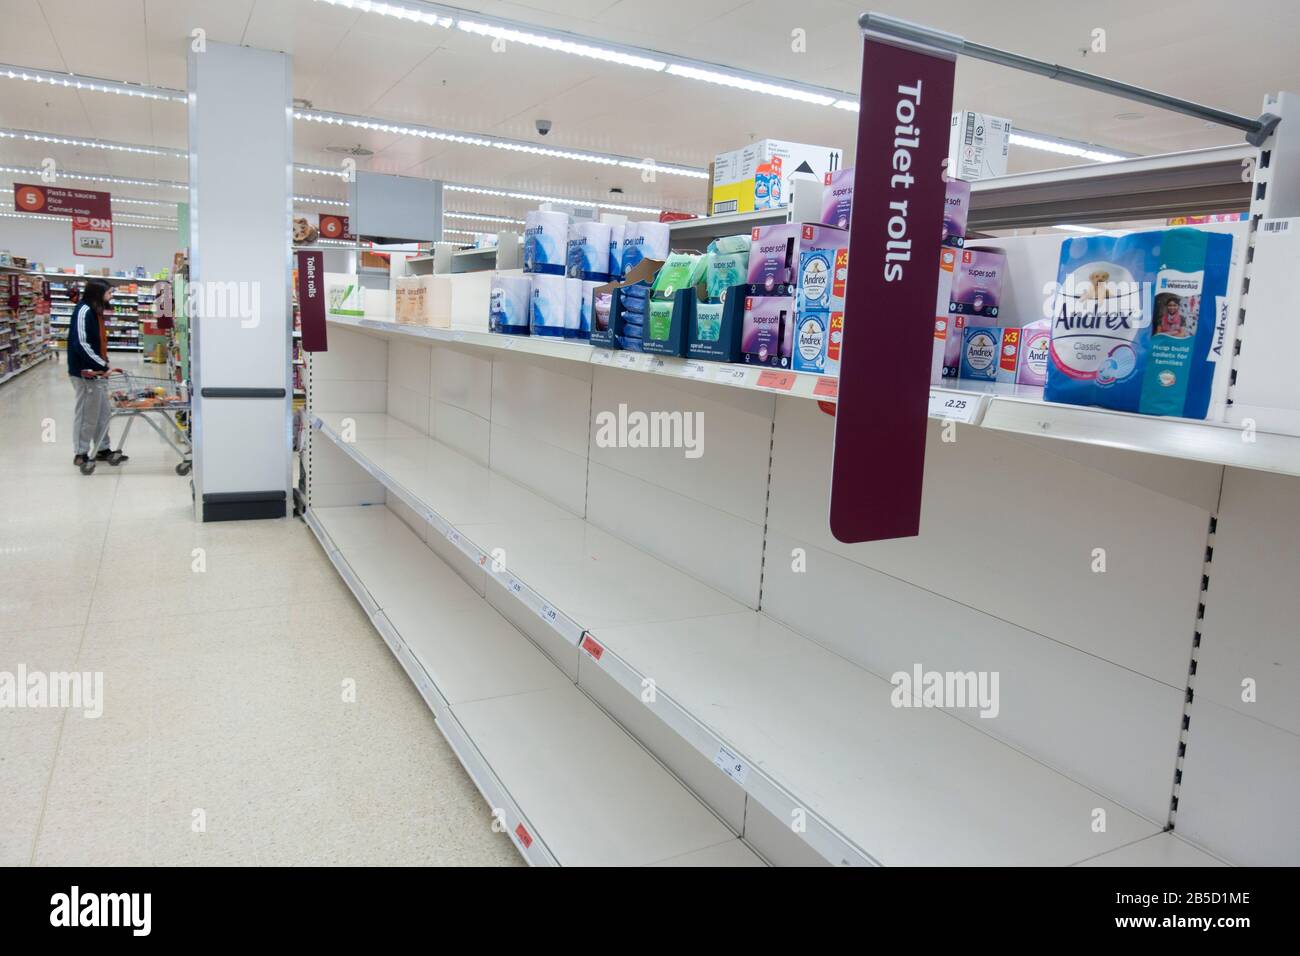 Edinburgh, Scotland, UK. 8 March, 2020.  Panic buying of packets of toilet tissue and liquid hand soaps leads to empty shelves at supermarkets in Edinburgh.  Pictured; Toilet paper sold out at SainsburyÕs store. Iain Masterton/Alamy Live News Stock Photo